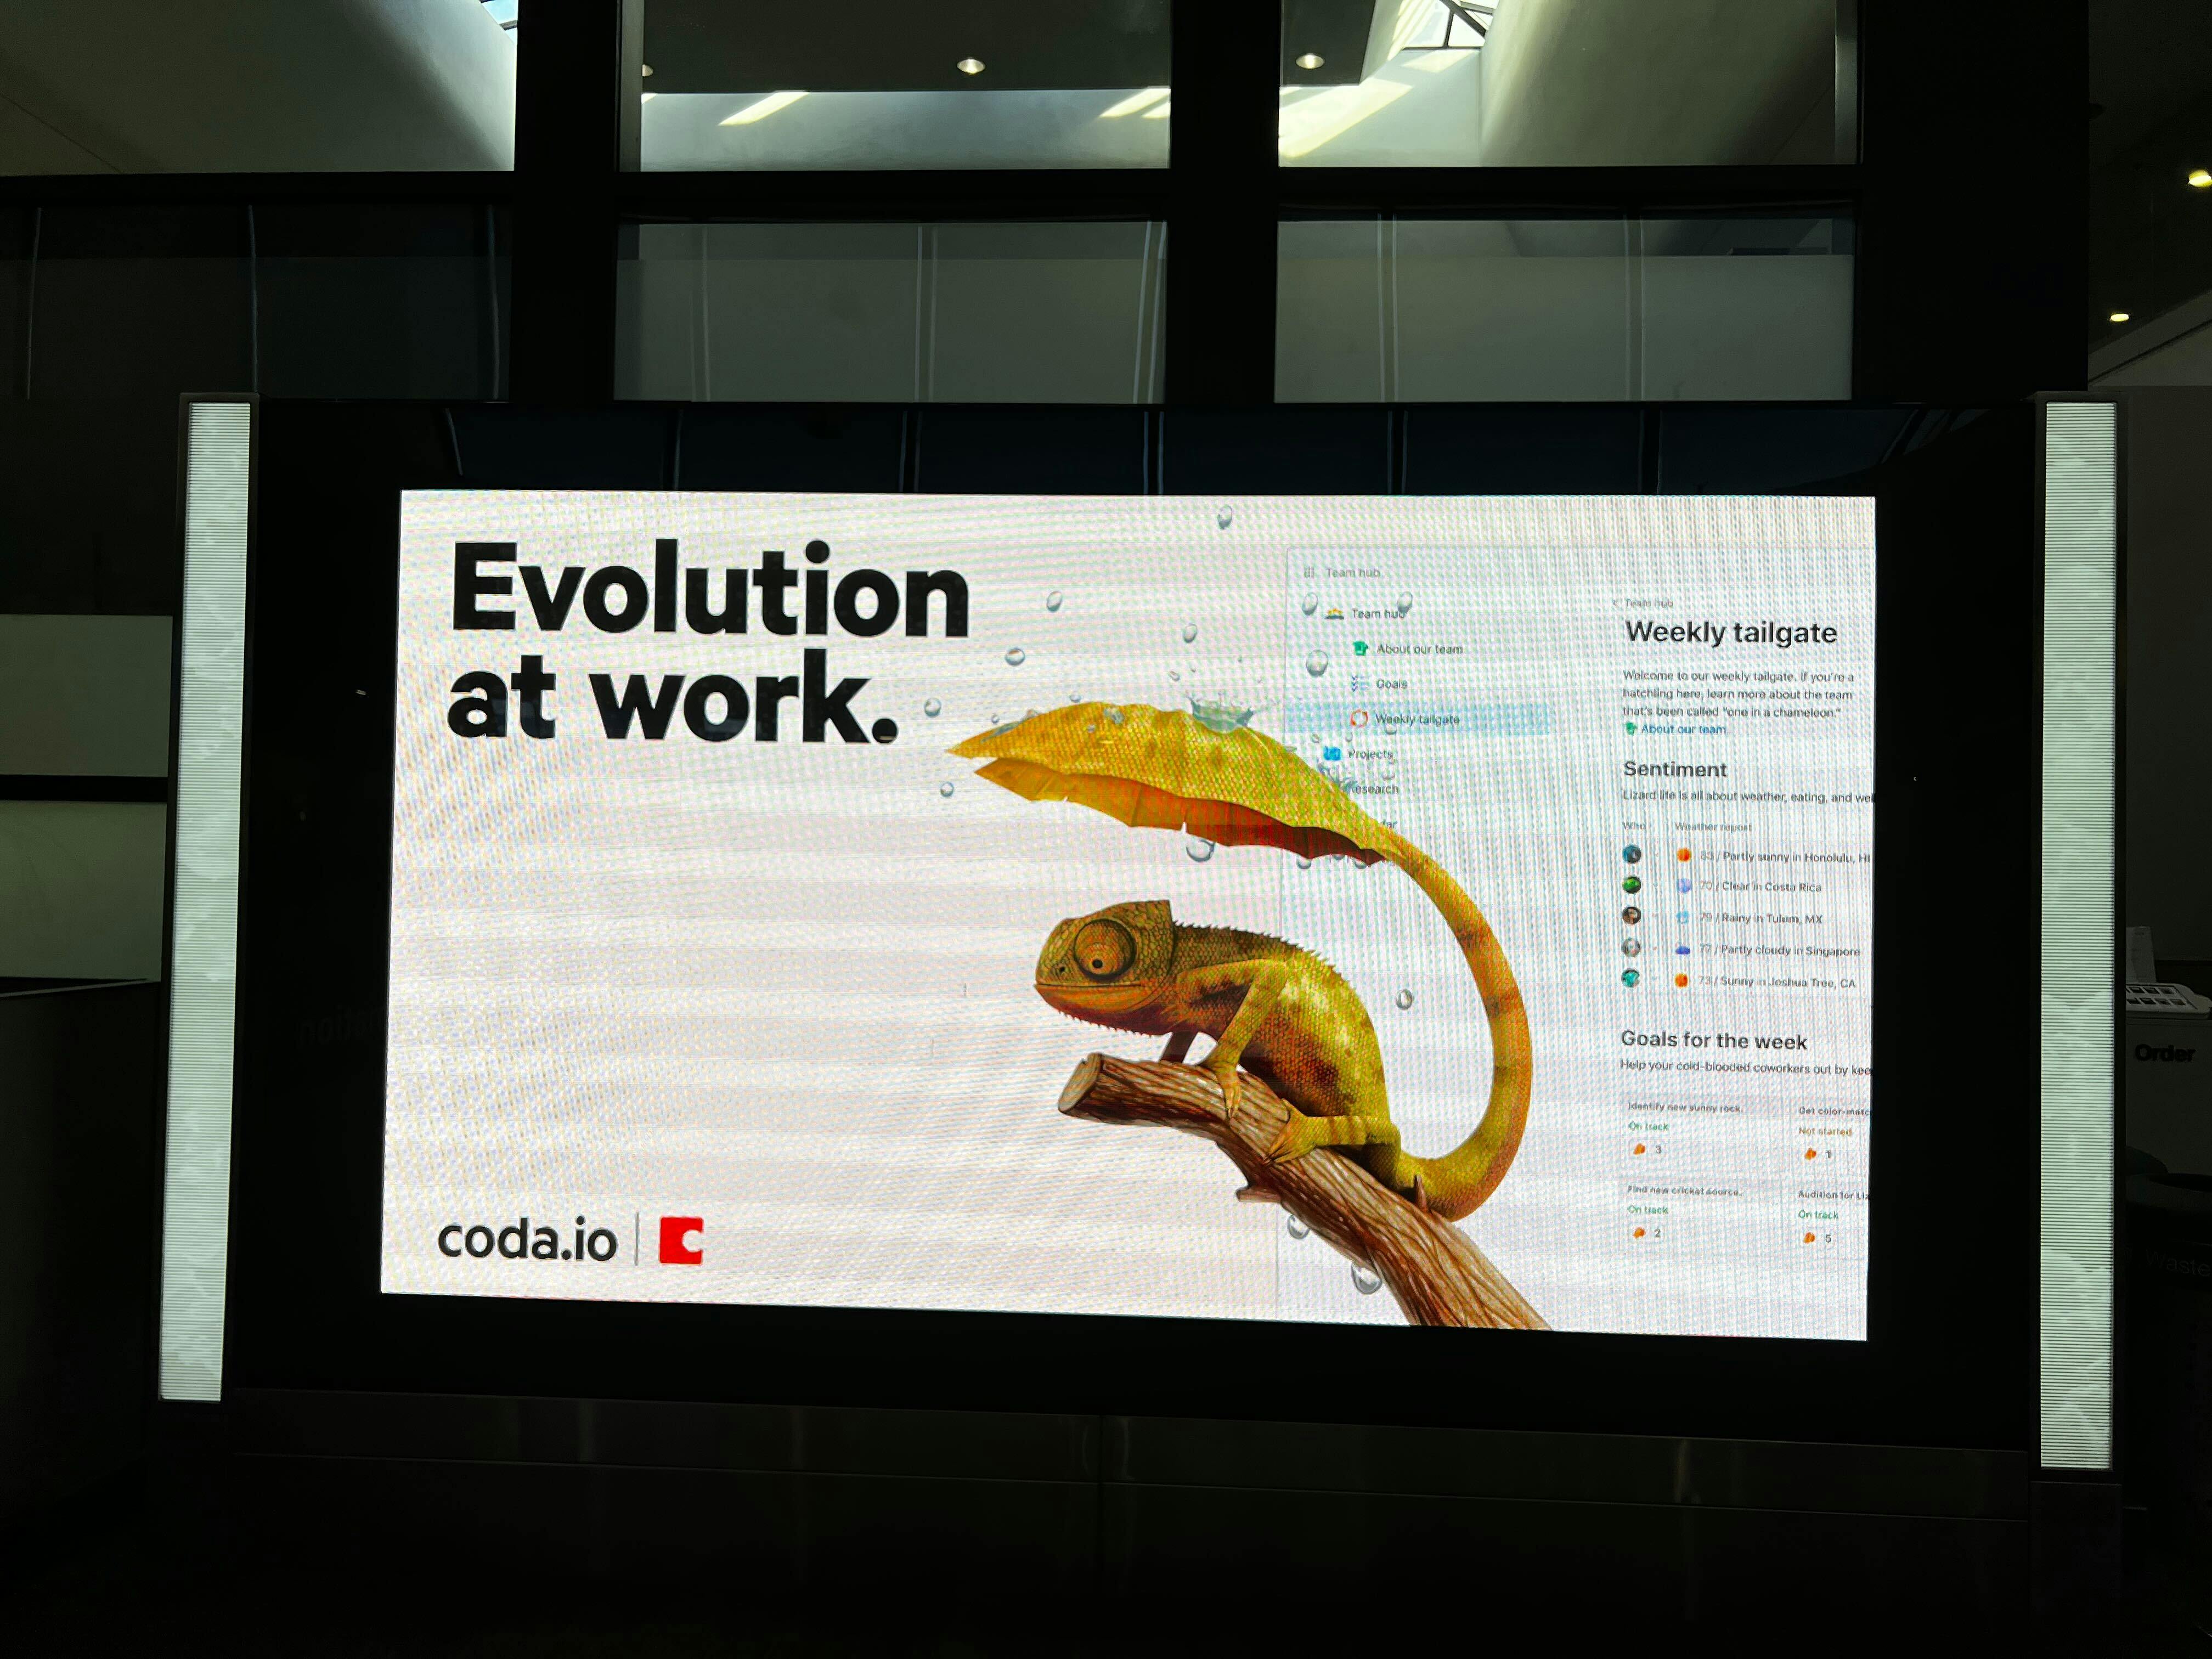 An ad in SFO airport in San Francisco - it features Chamaeleo Umbrello, a lizard with an umbrella tail to block the rain